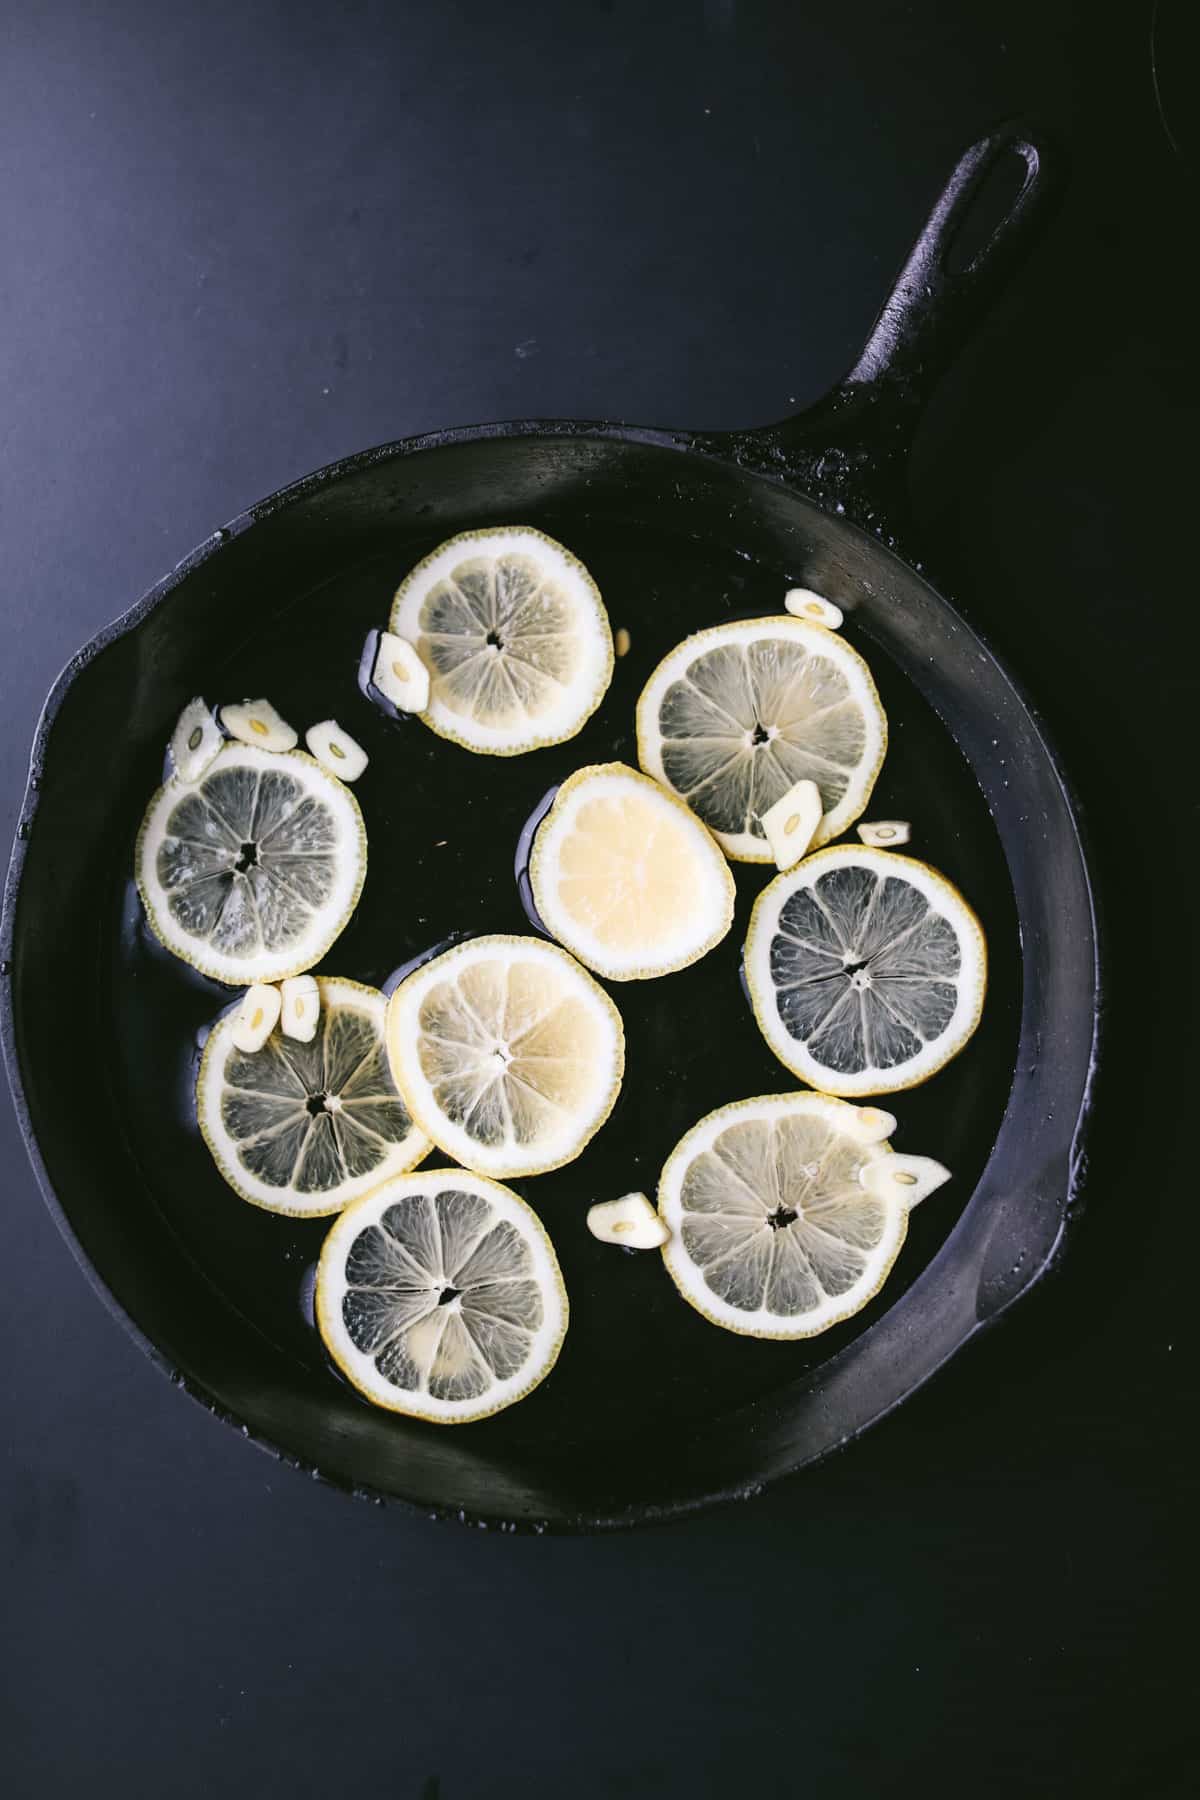 lemon and garlic in a cast iron pan